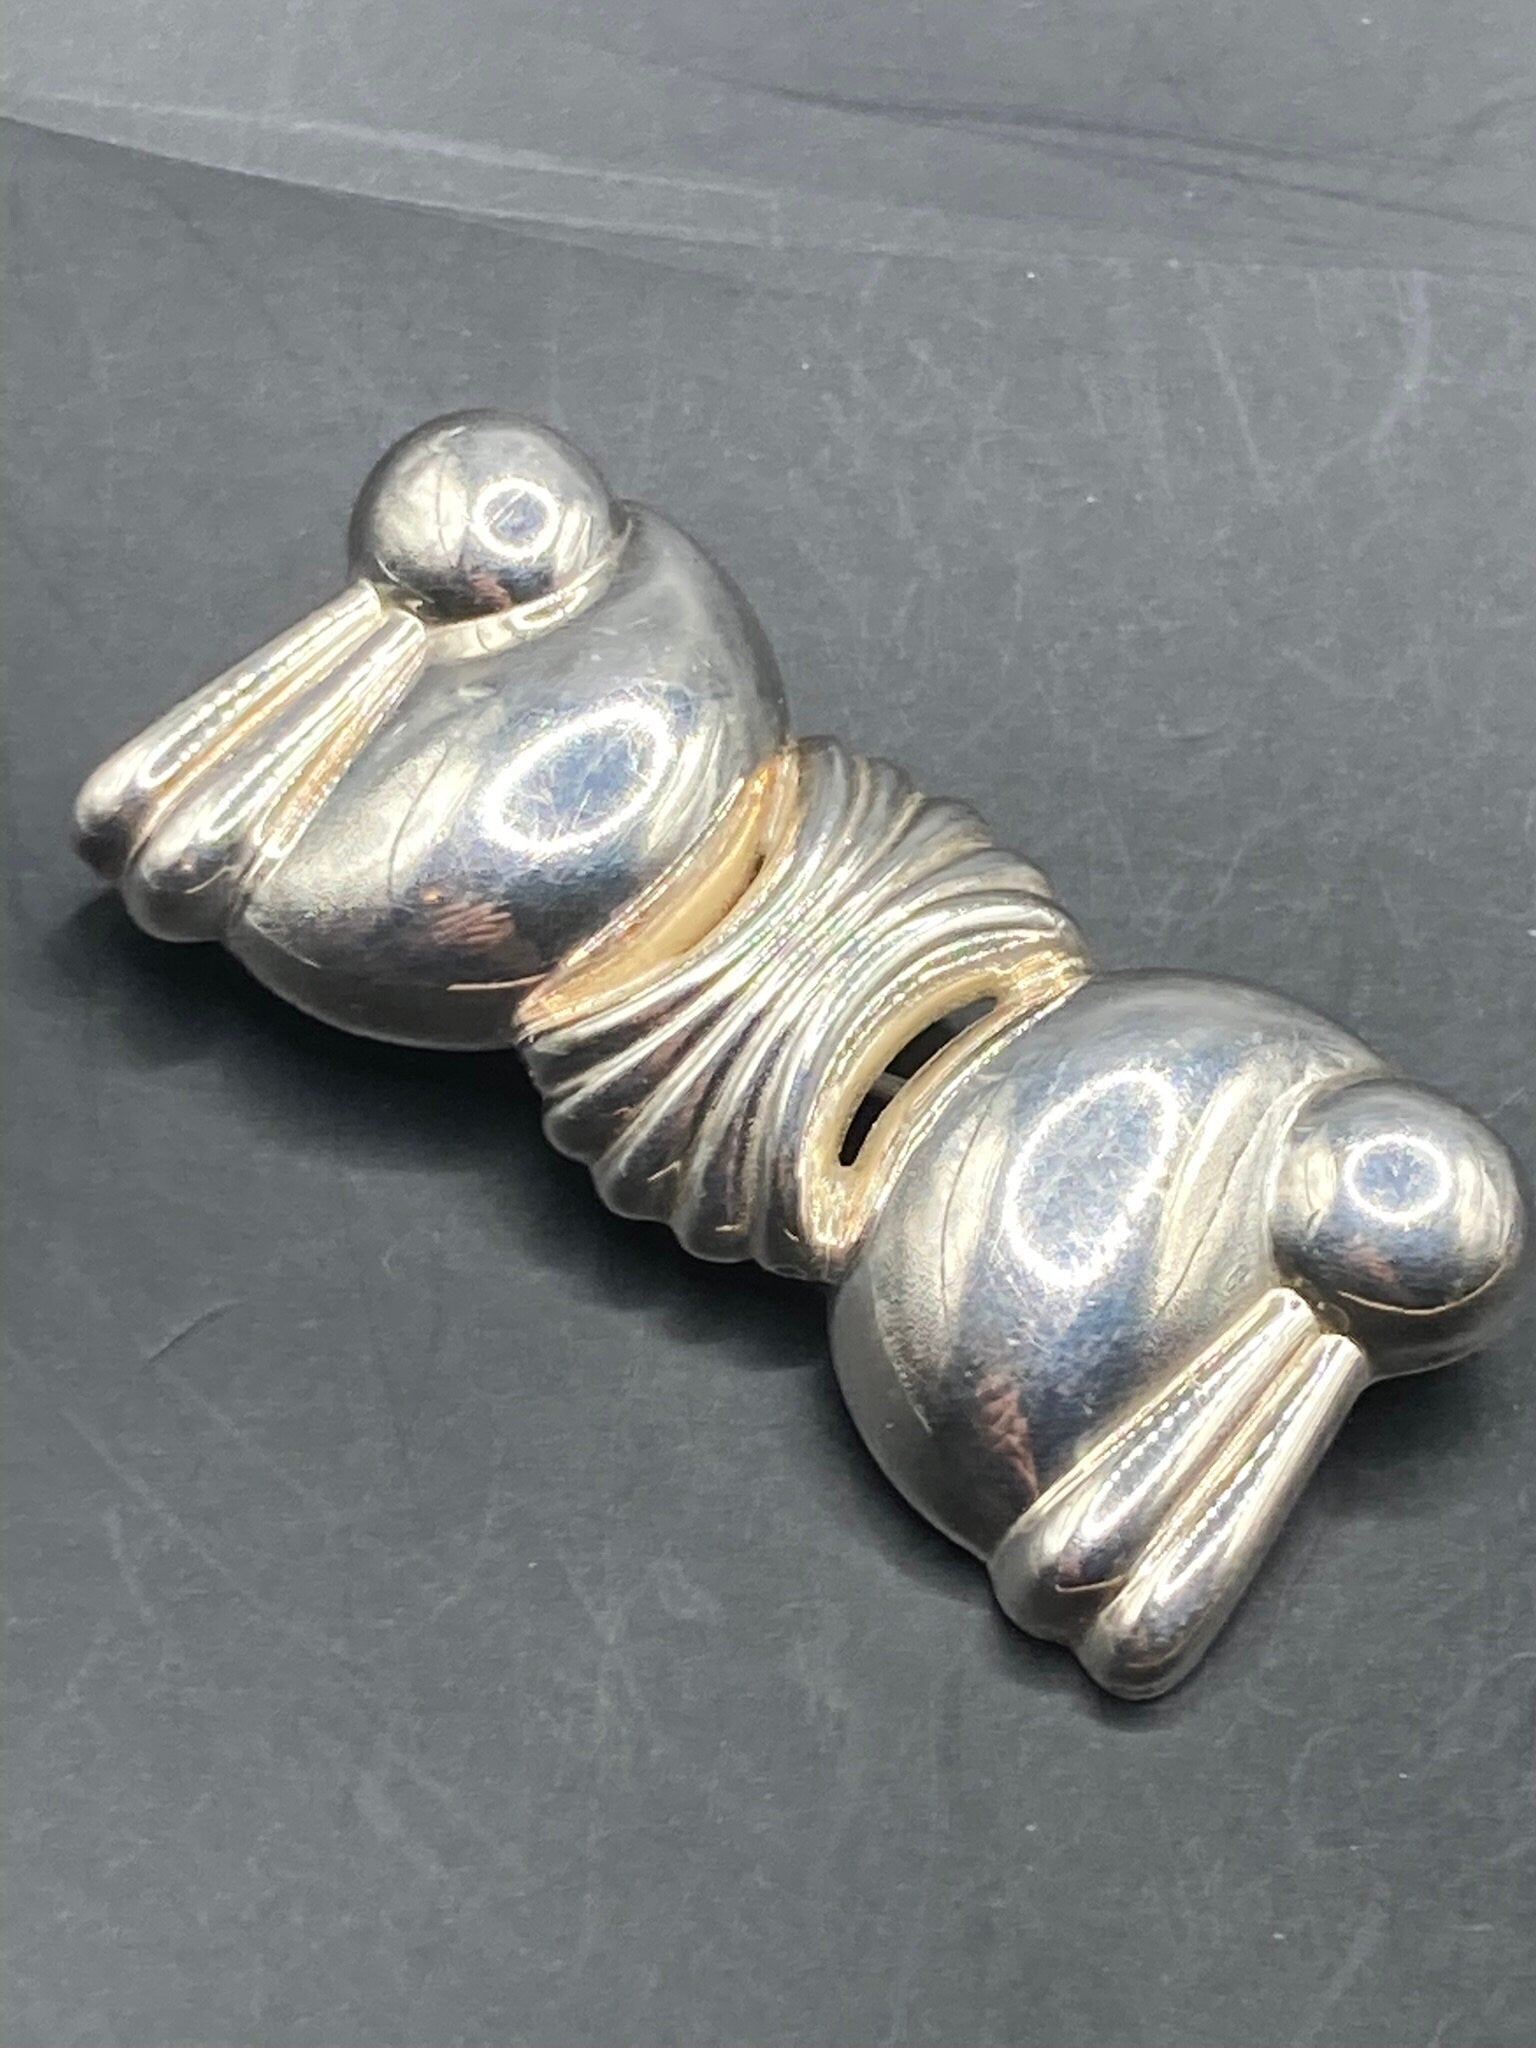 Signed Italy Giani 925 vintage Retro modernist Sterling Silver detailed embossed bow brooch roll clasp italian brooch